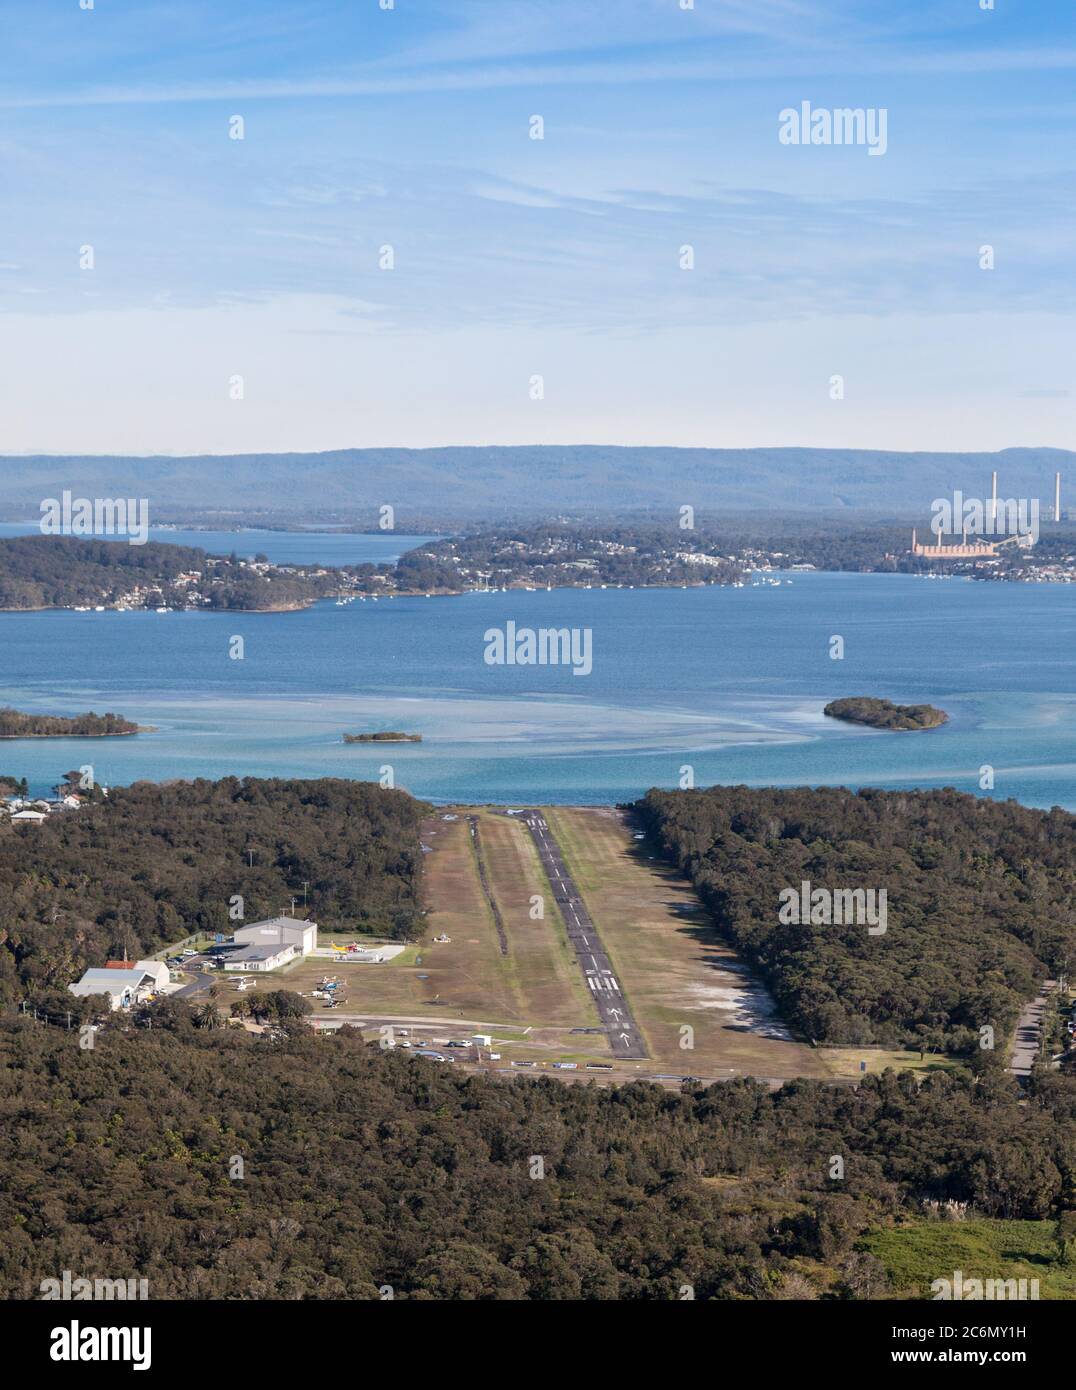 This small airport is located between Blacksmiths Beach and Lake Macquarie. The airport no longer is used for commercial passenger flights but for sce Stock Photo